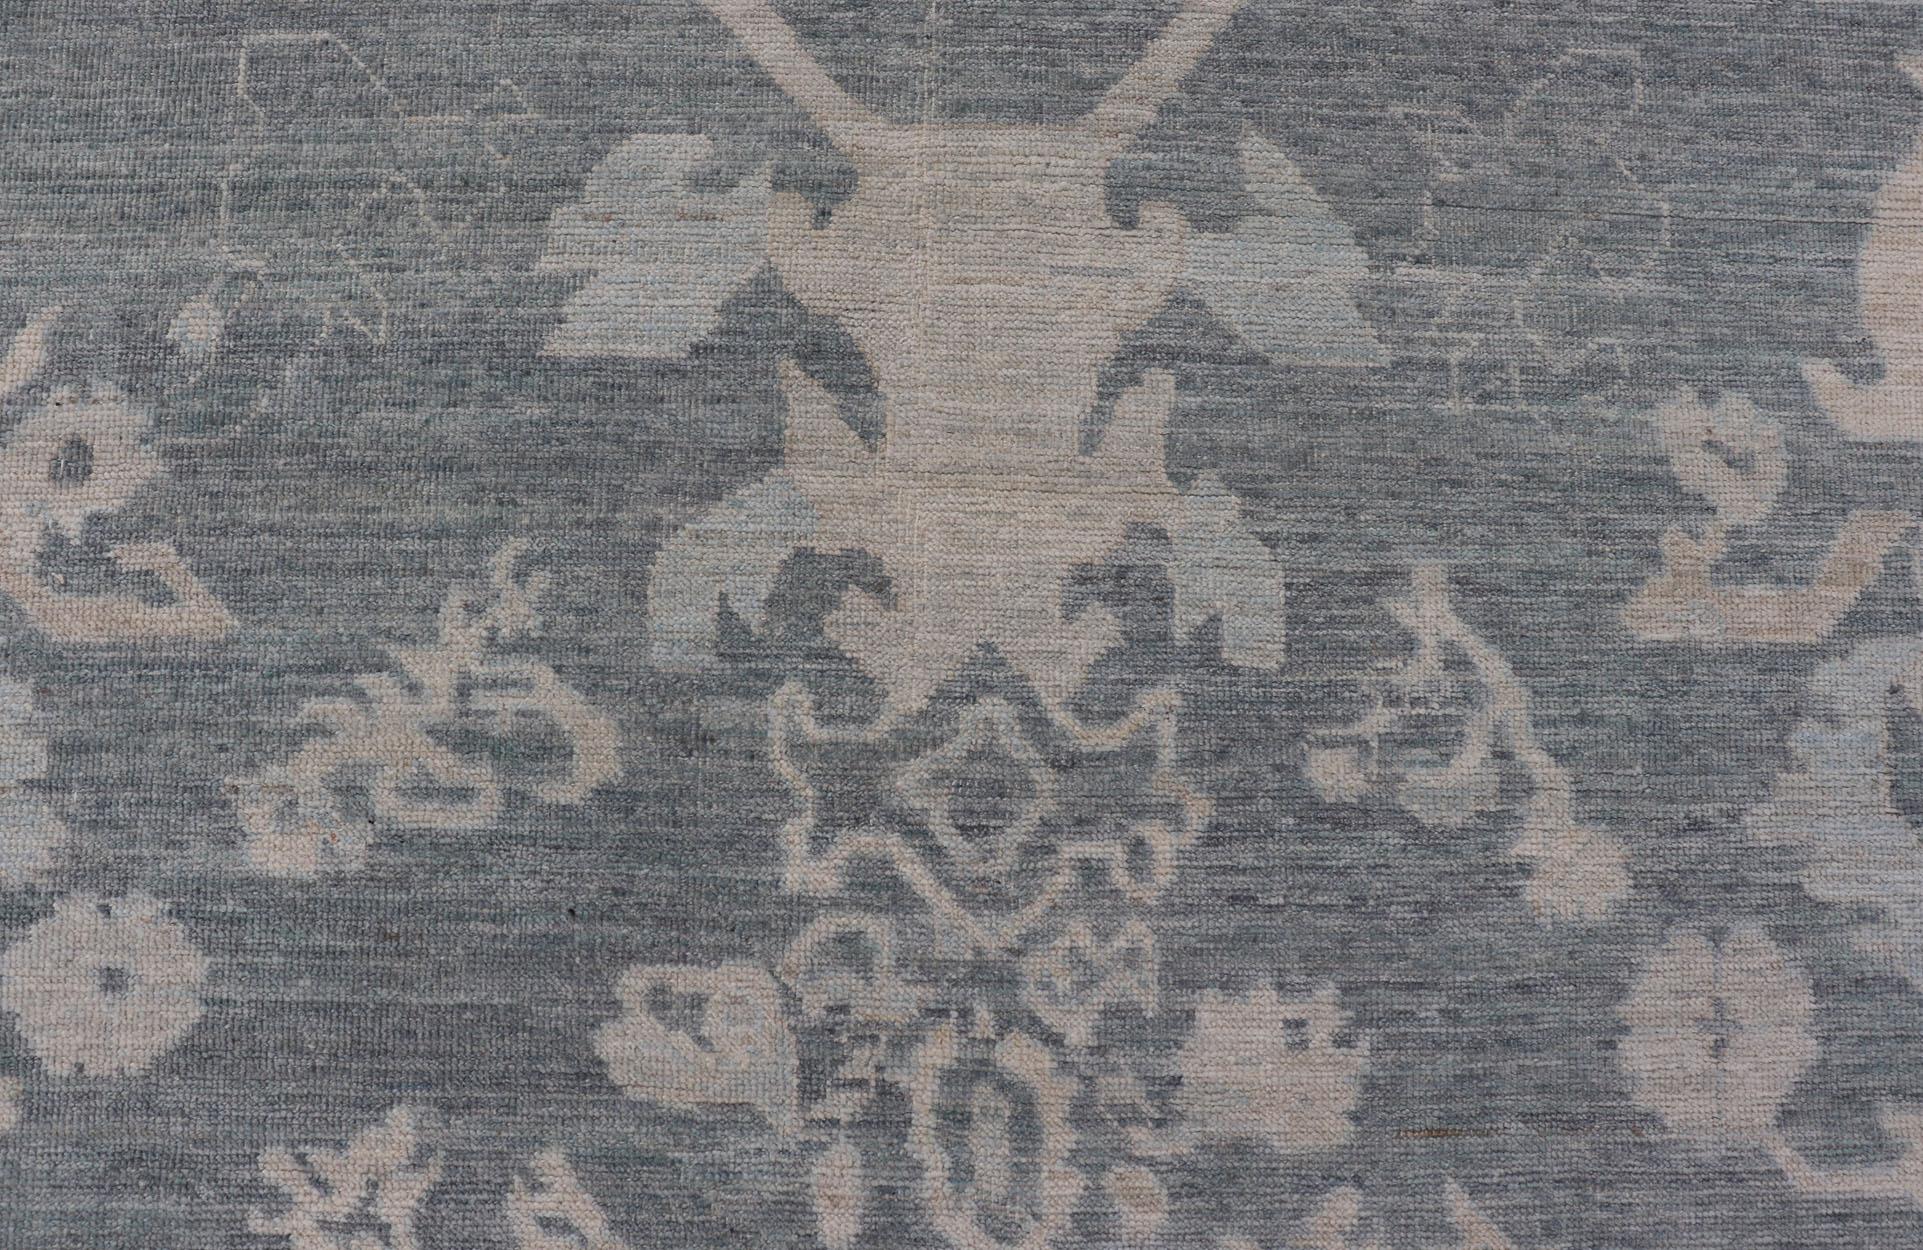 Large Modern Oushak Rug with Muted Tones of Blue, Gray, and Cream In New Condition For Sale In Atlanta, GA